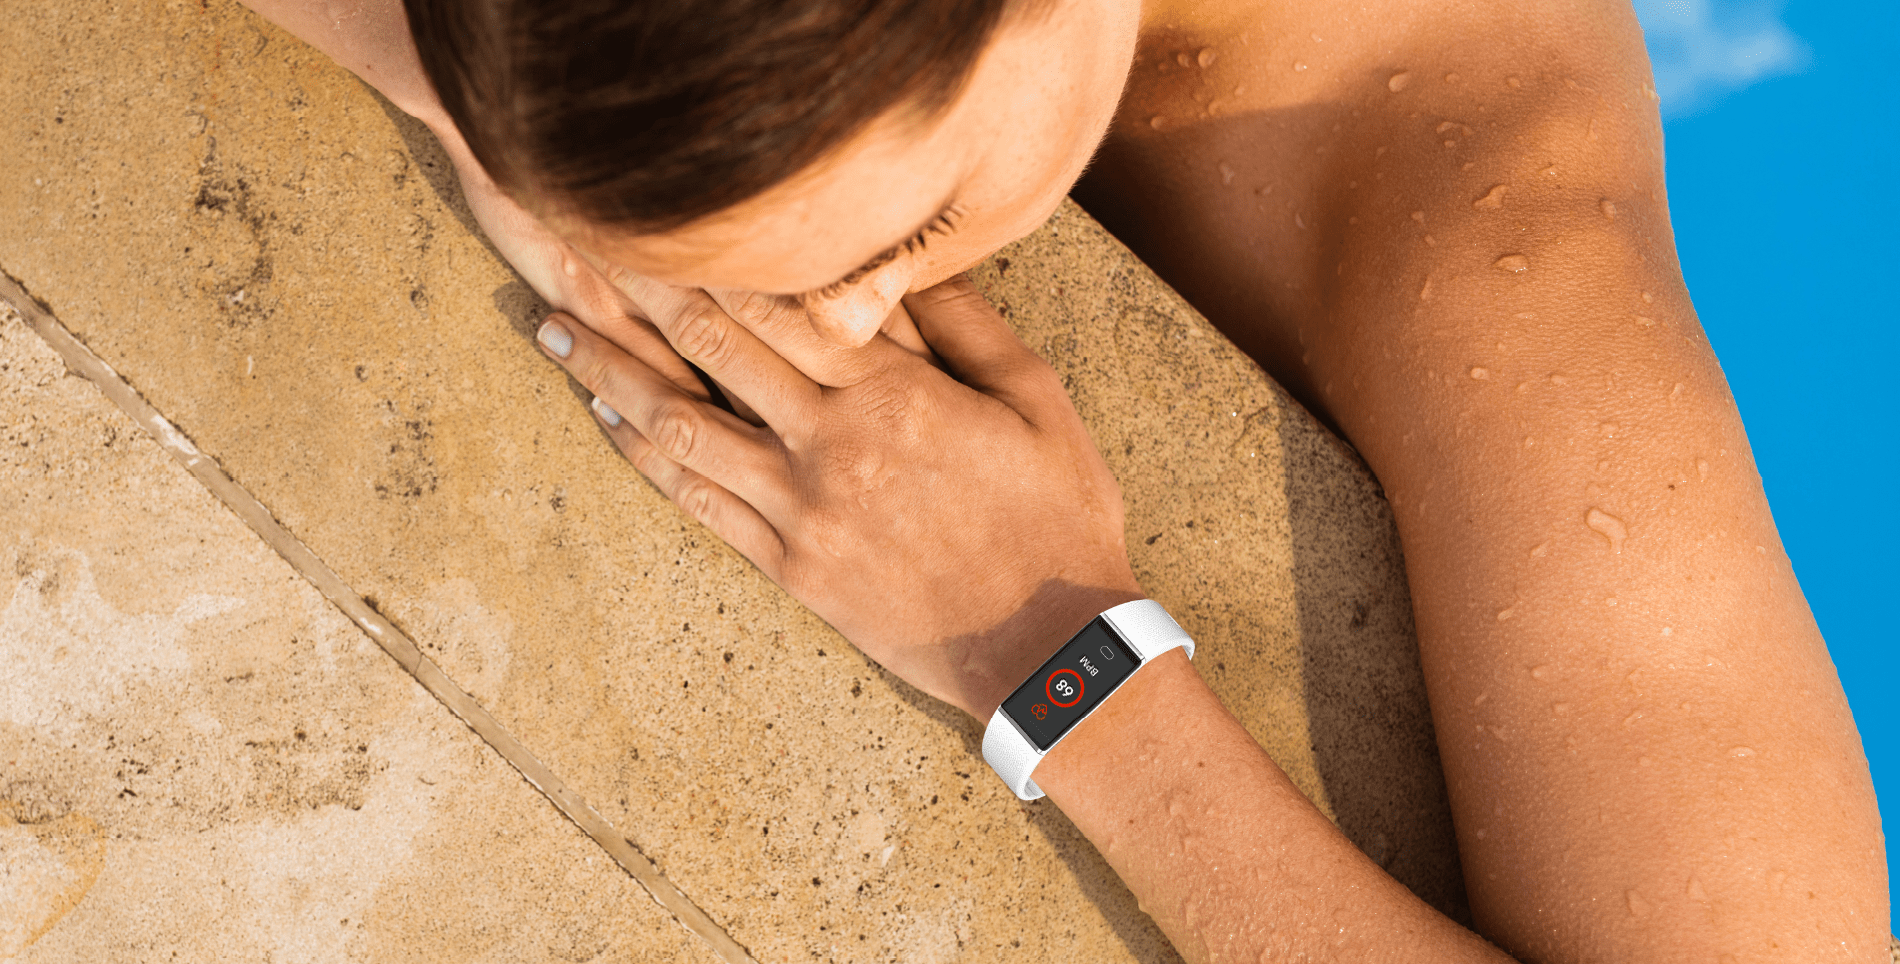 Water resistant activity tracker. IP67, 6: Protected from dust, 7: Protected against the effects of immersion in water to depth between 15 cm and 1 meter